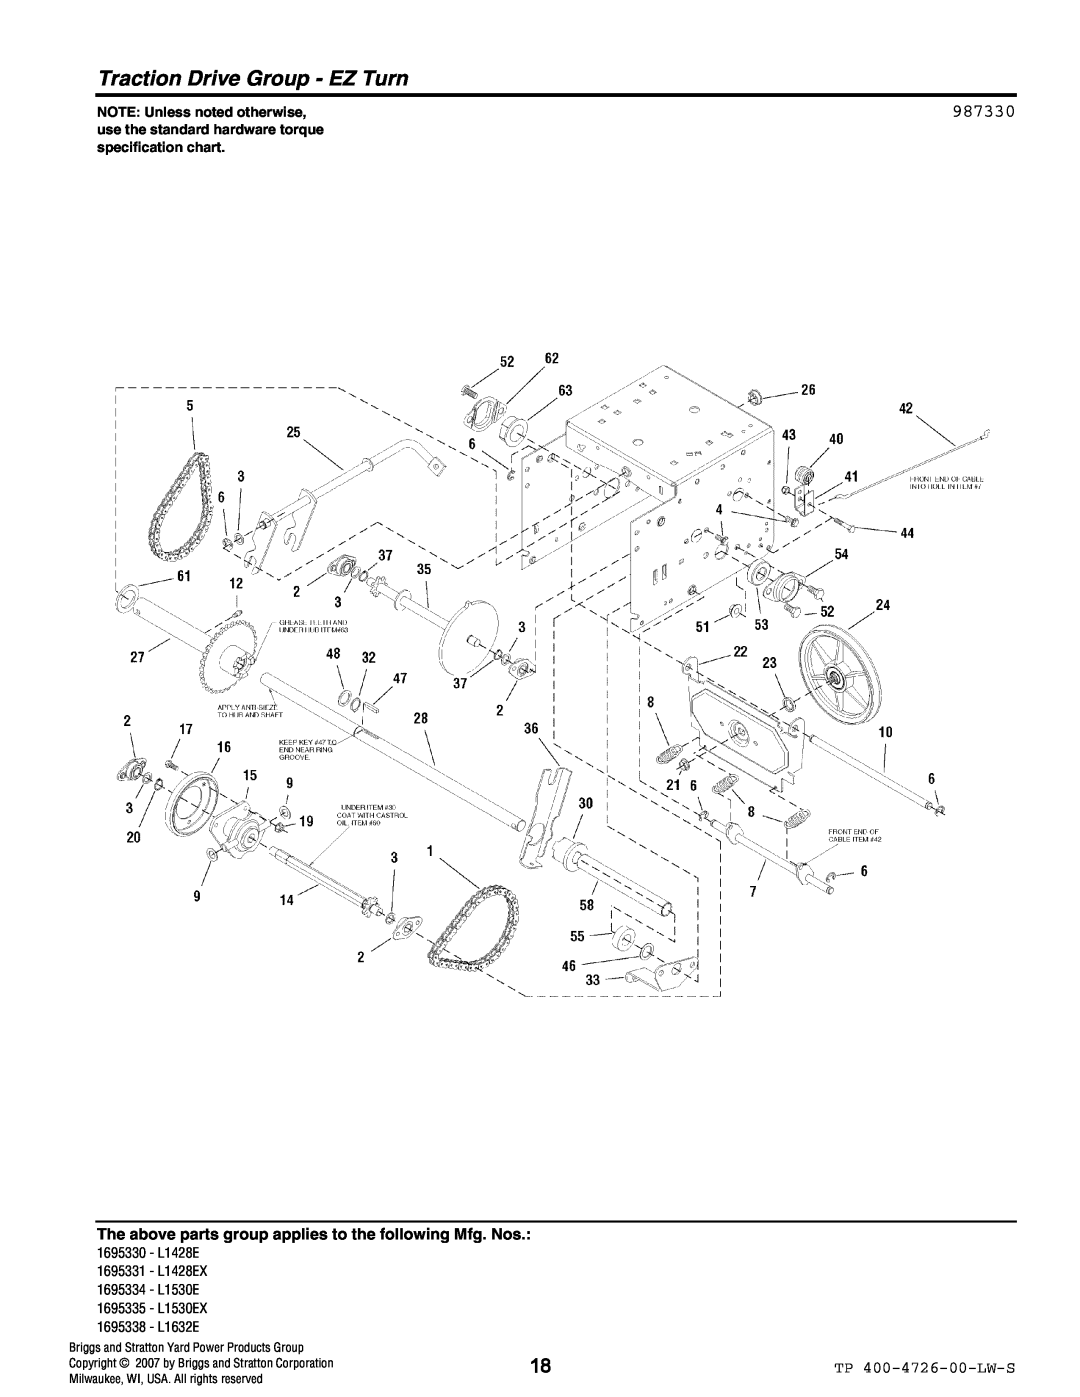 Simplicity 1696331 Traction Drive Group - EZ Turn, 987330, NOTE Unless noted otherwise, 1695330 - L1428E 1695331 - L1428EX 